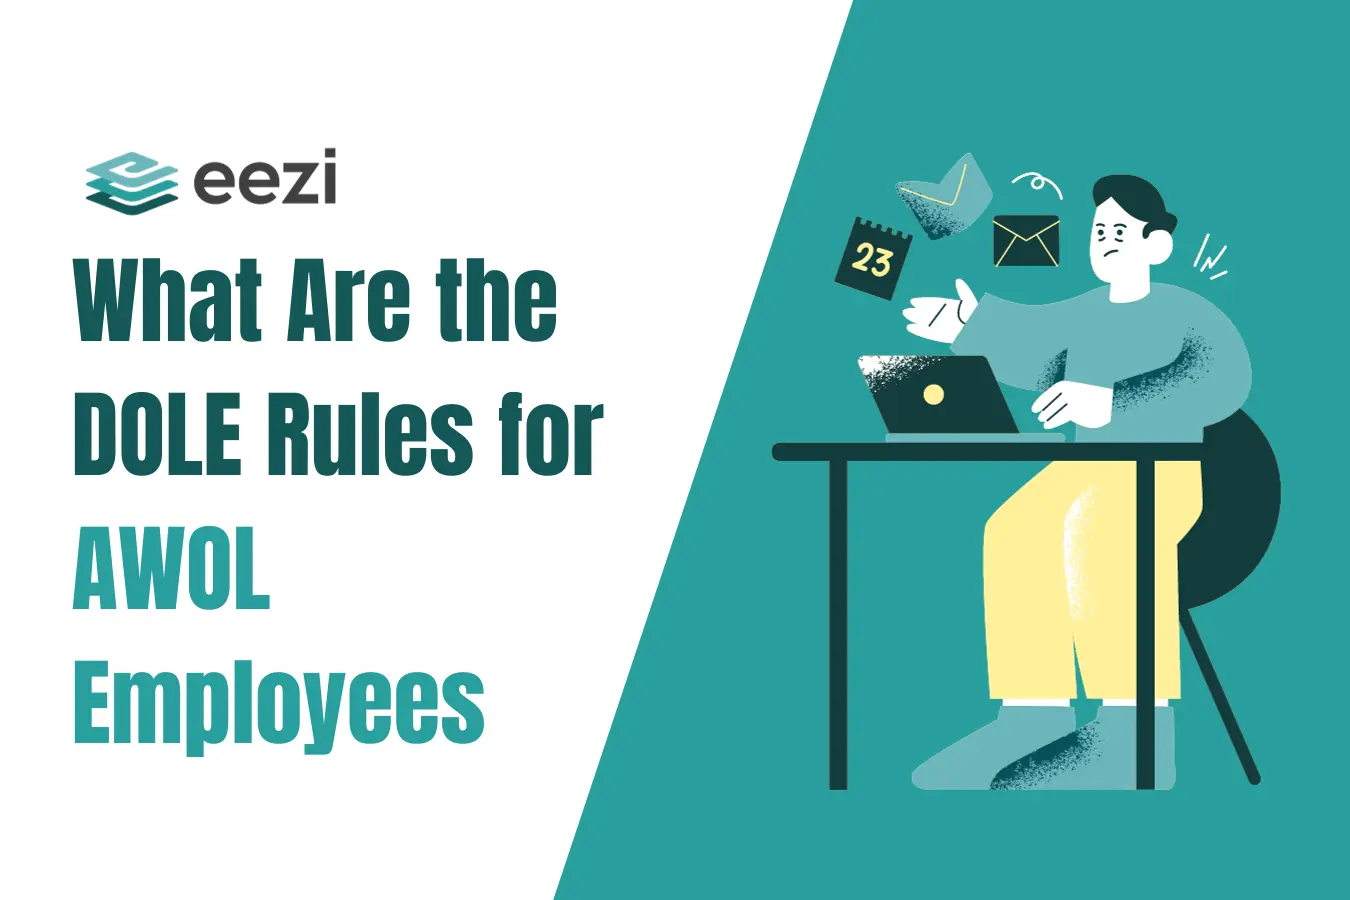 What Are the DOLE Rules for AWOL Employees